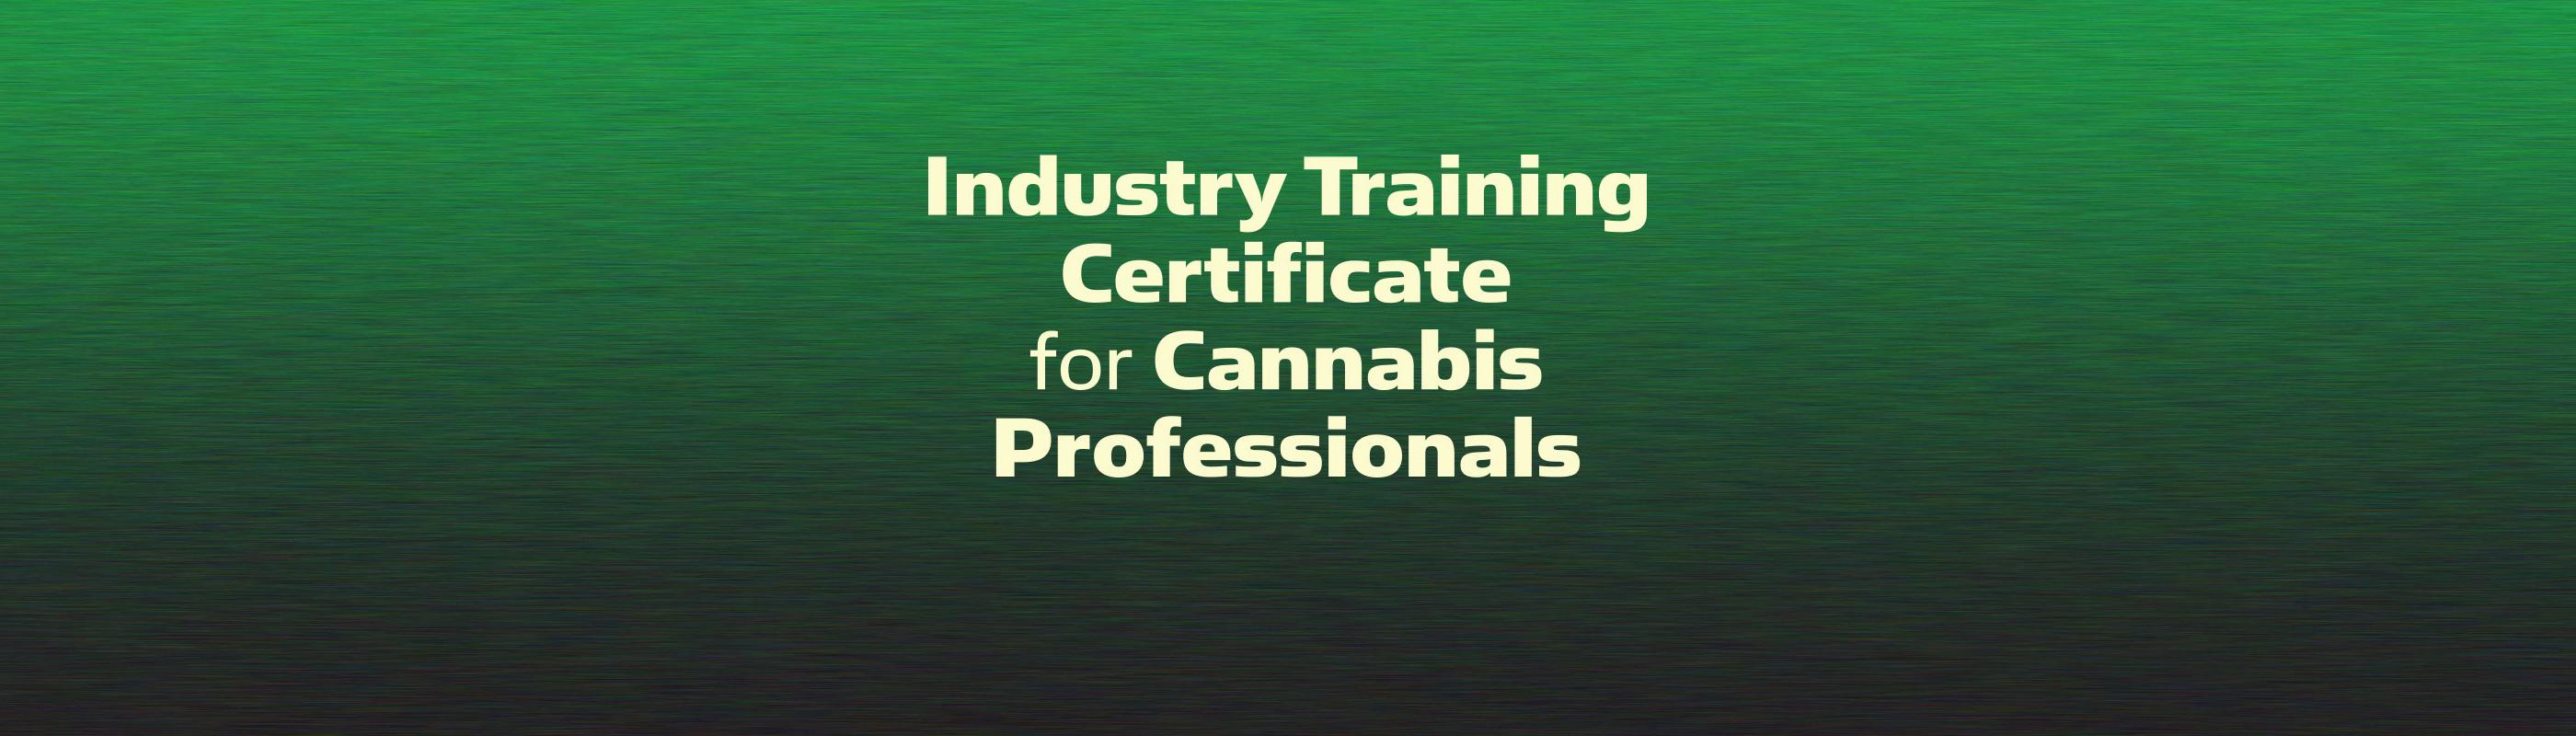 Industry Training Certificate for Cannabis Professionals